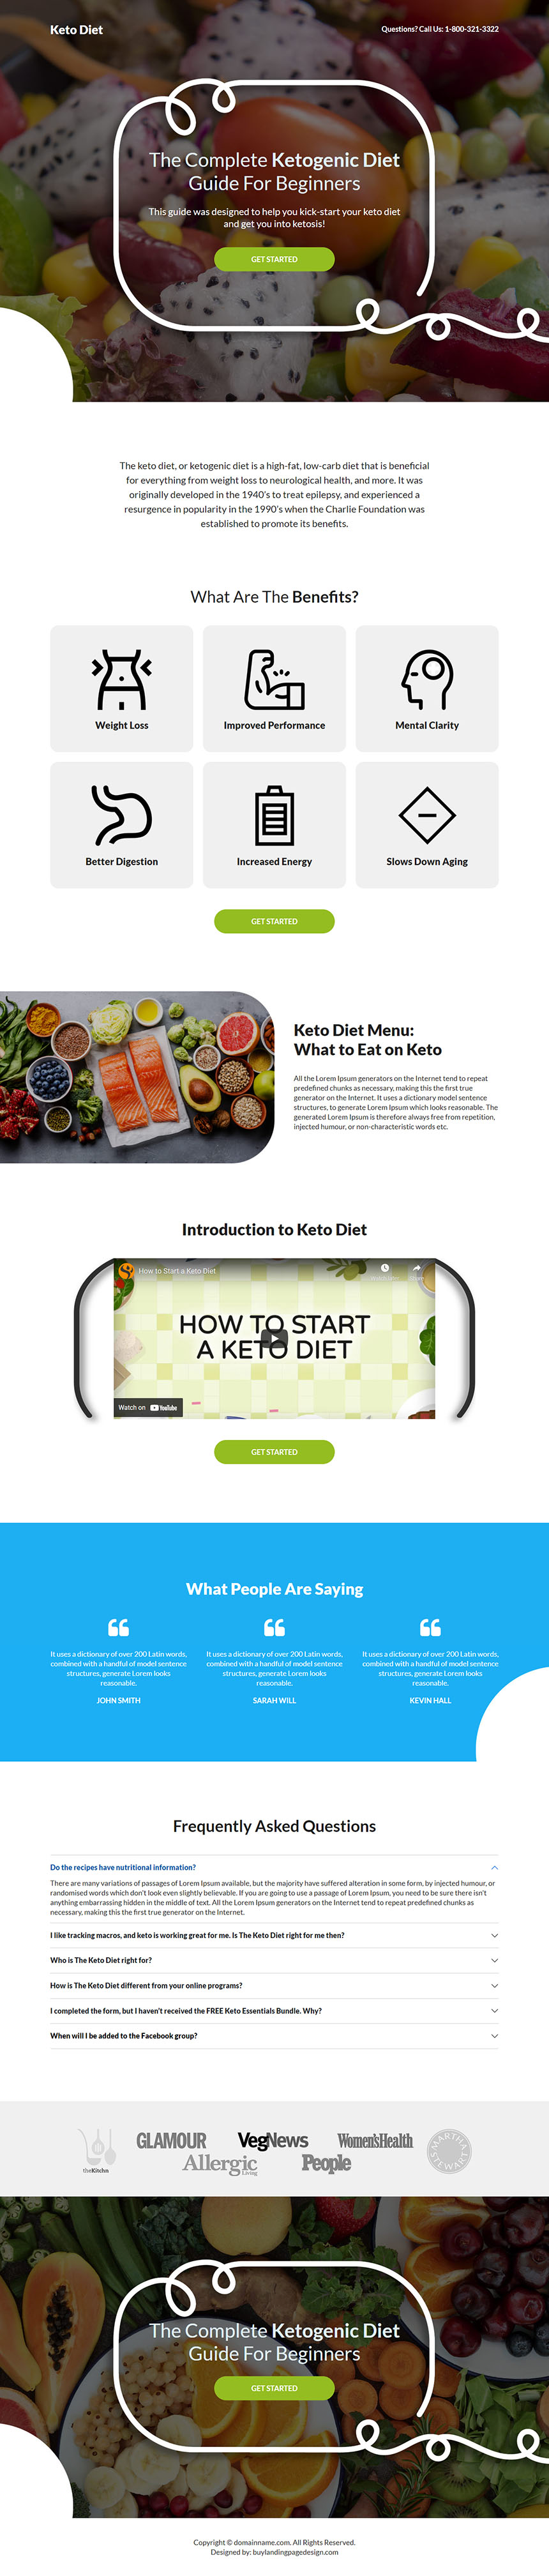 keto diet guide weight loss responsive landing page design